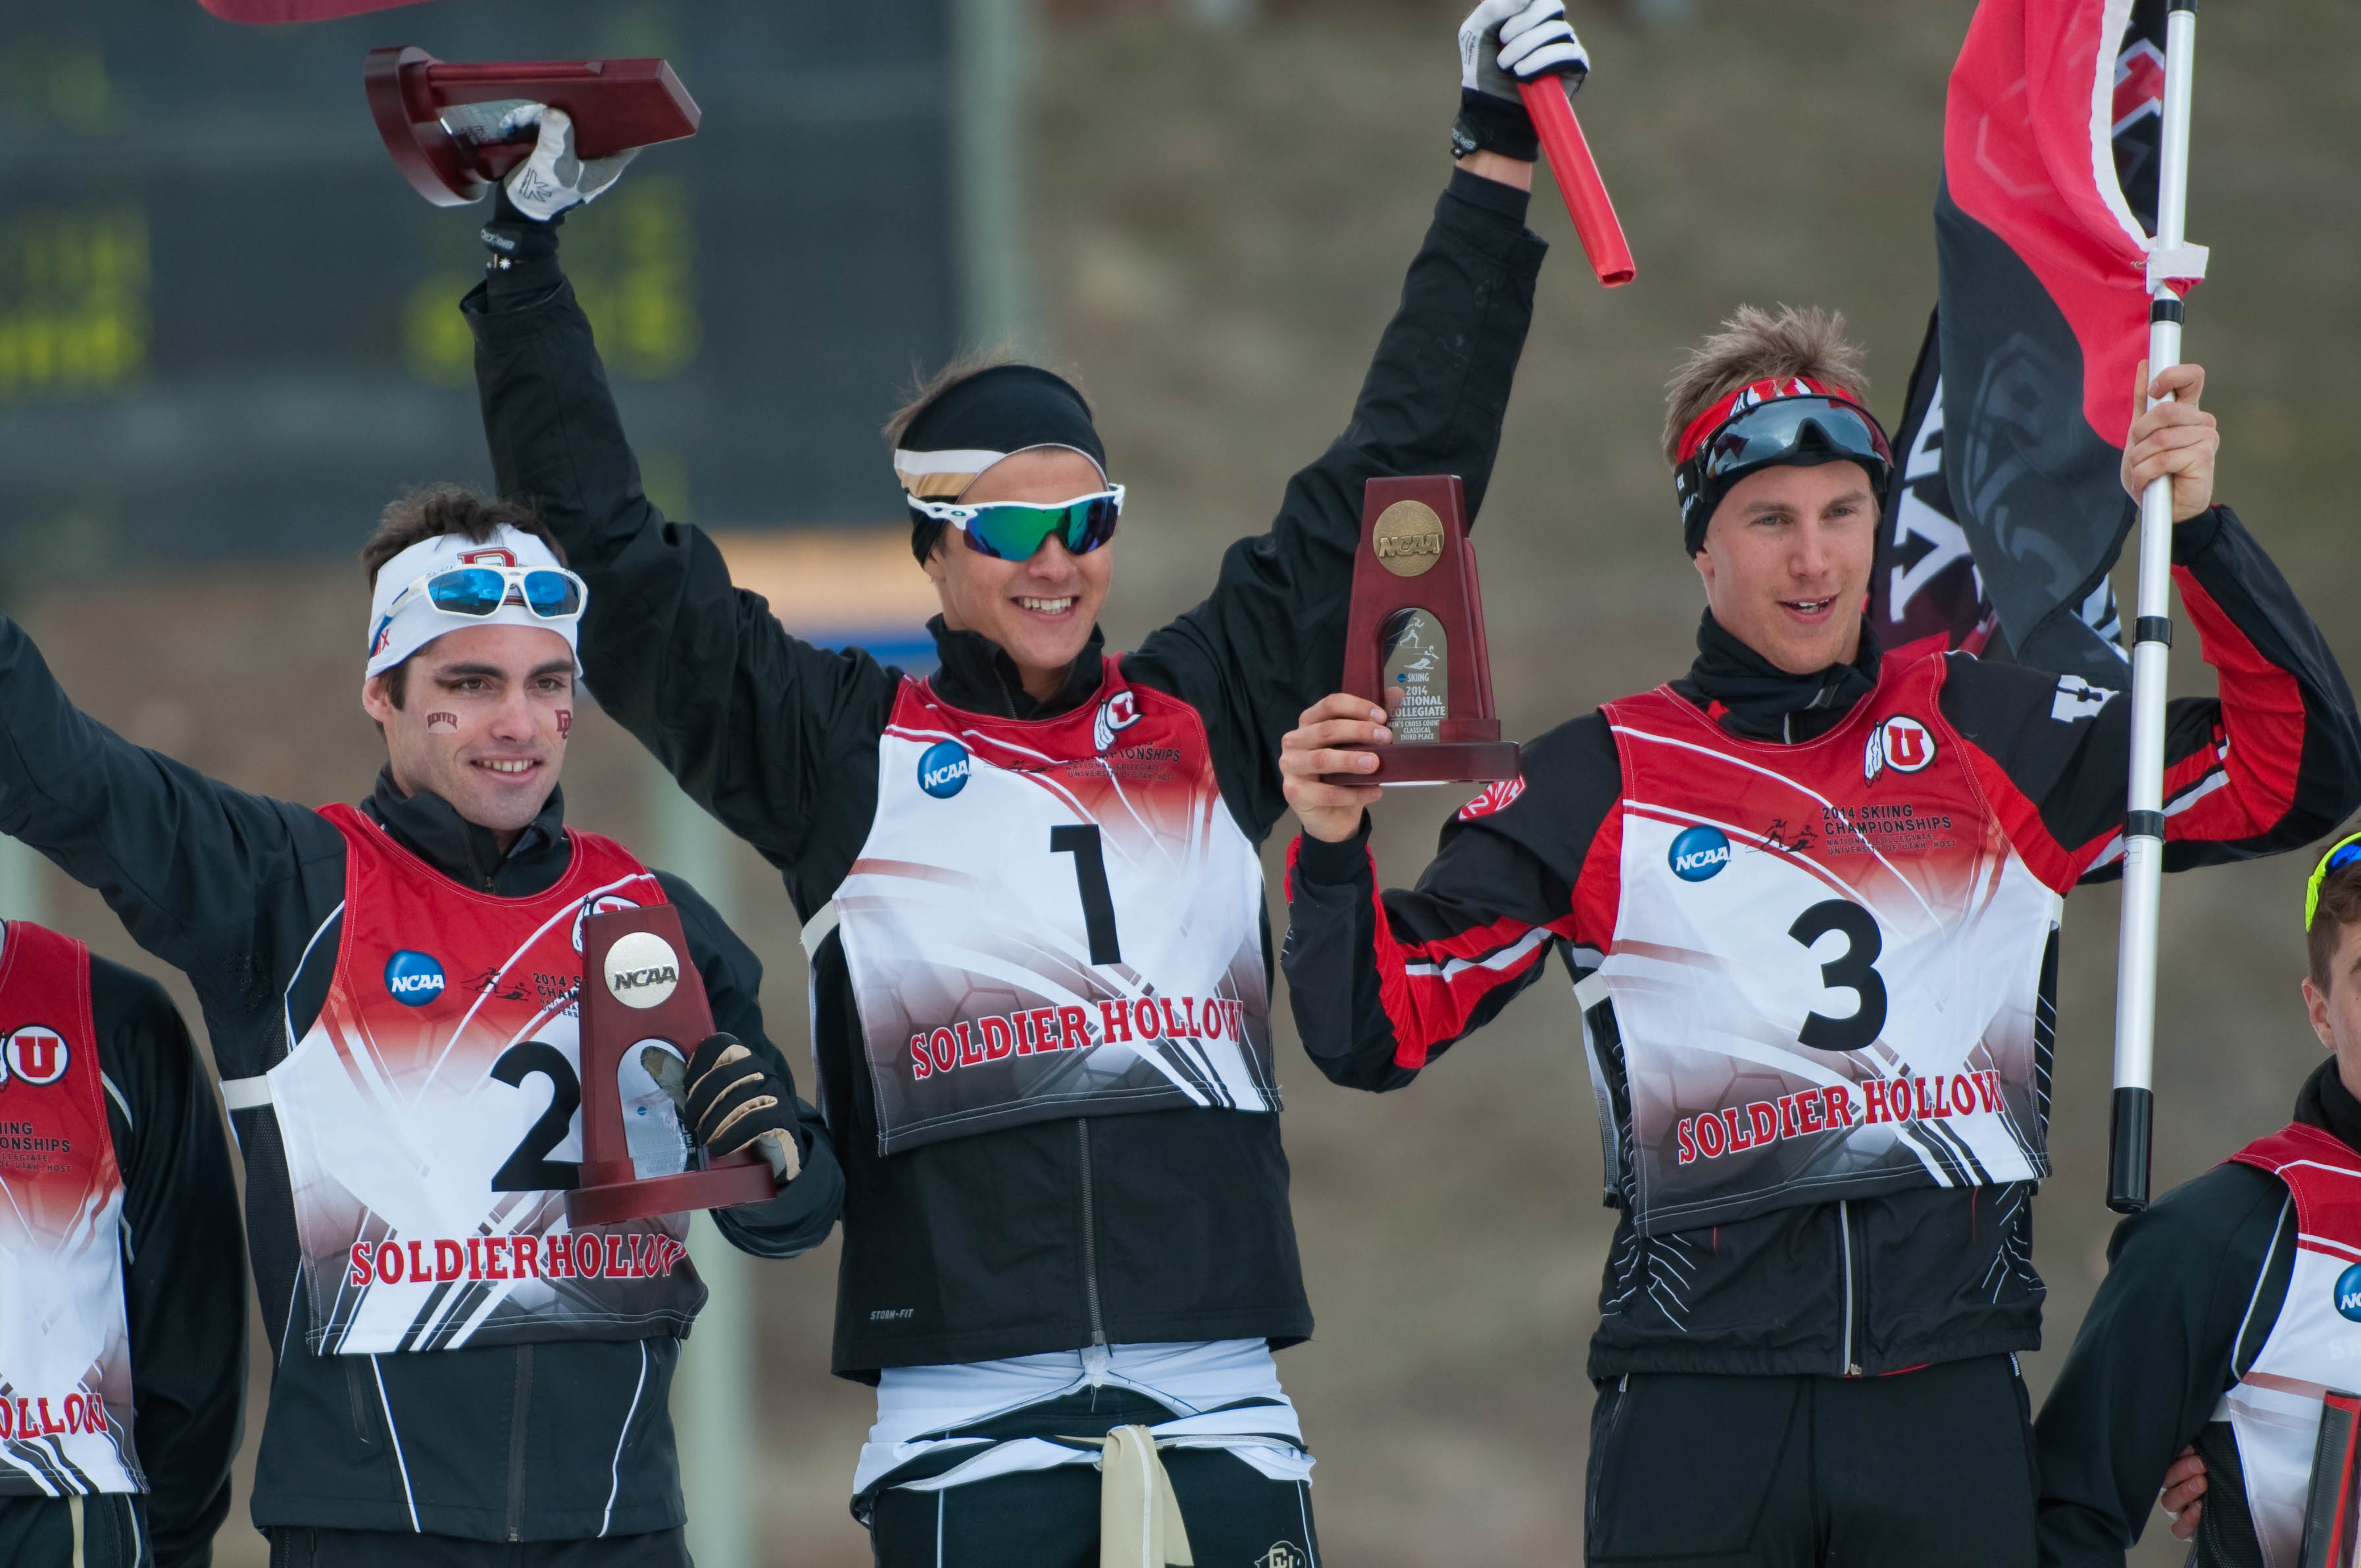 Rune Ødegård (Colorado) stands atop the podium for his win in the 10 k classic at the 2014 NCAA Championships. Pierre Guedon (Denver) and Niklas Persson (Utah) followed in second and third for a European sweep.(Photo: http://bertboyer.zenfolio.com) All proceeds from photo sales will be directly donated to NNF.